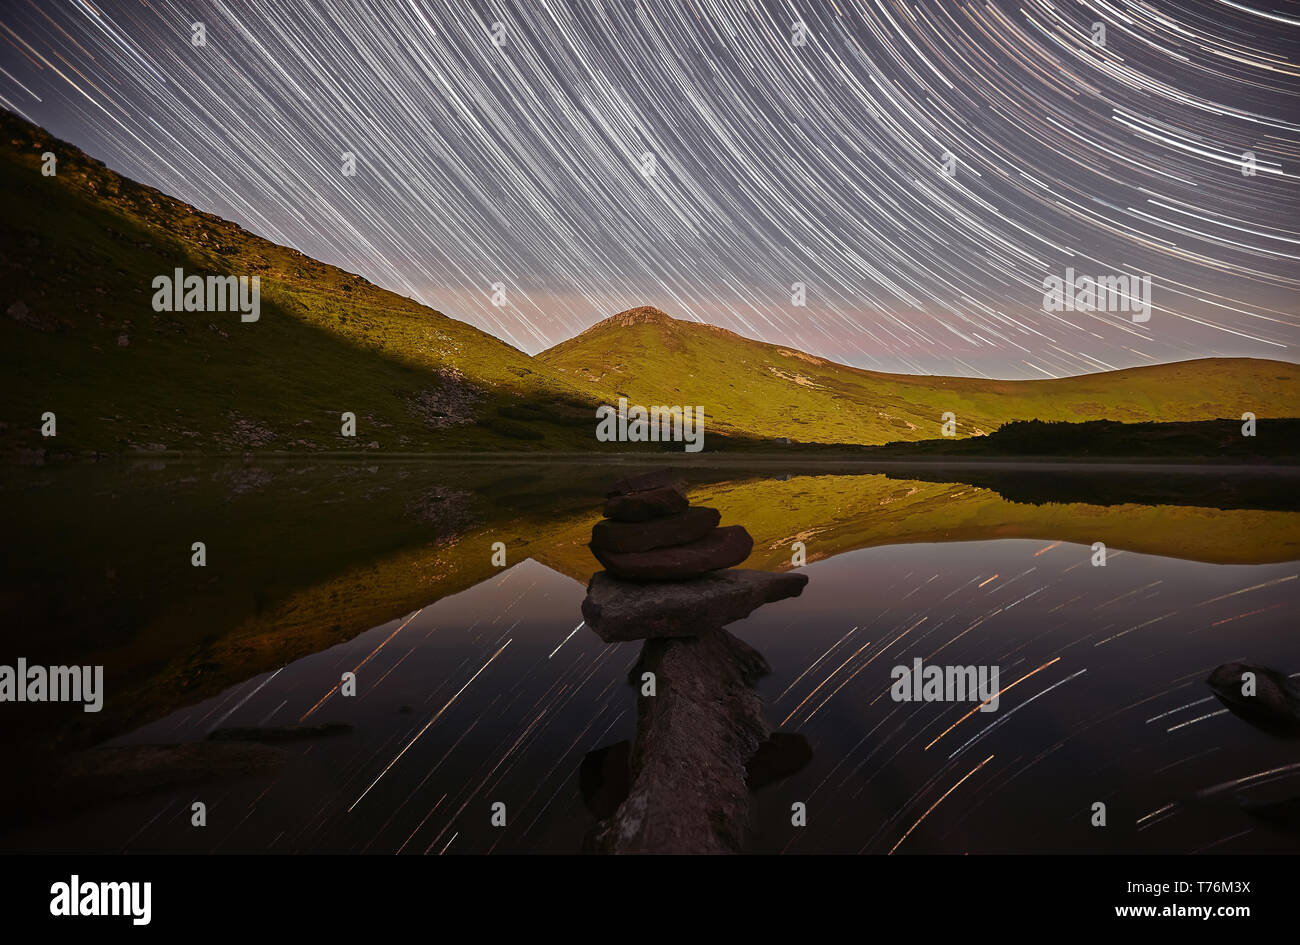 Magic night landscape with mountains, lake and amazing starry sky, star trails in the night sky, pyramid of stones. Chornogora, Nesamovyte lake. Carpa Stock Photo